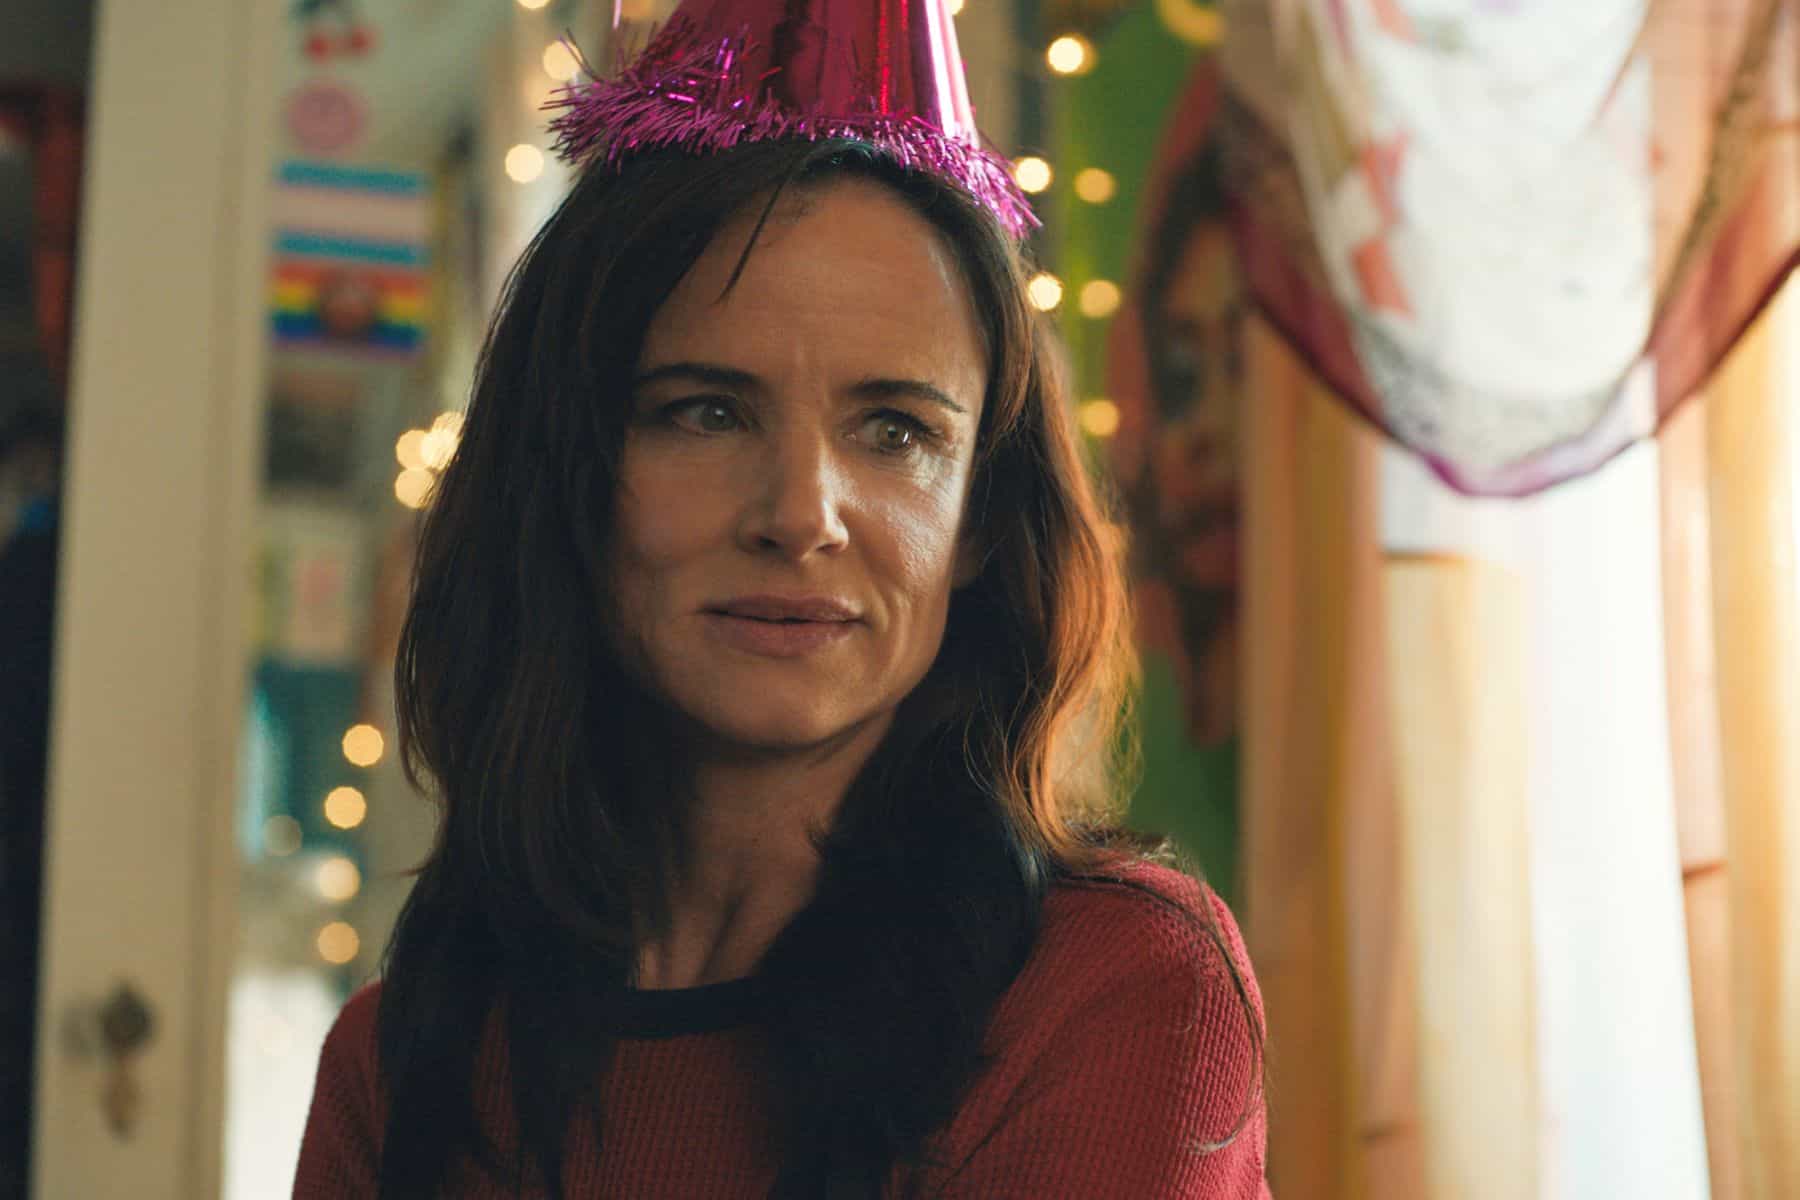 A woman in a party hat stares at something off-screen in this image from Universal Content Productions.